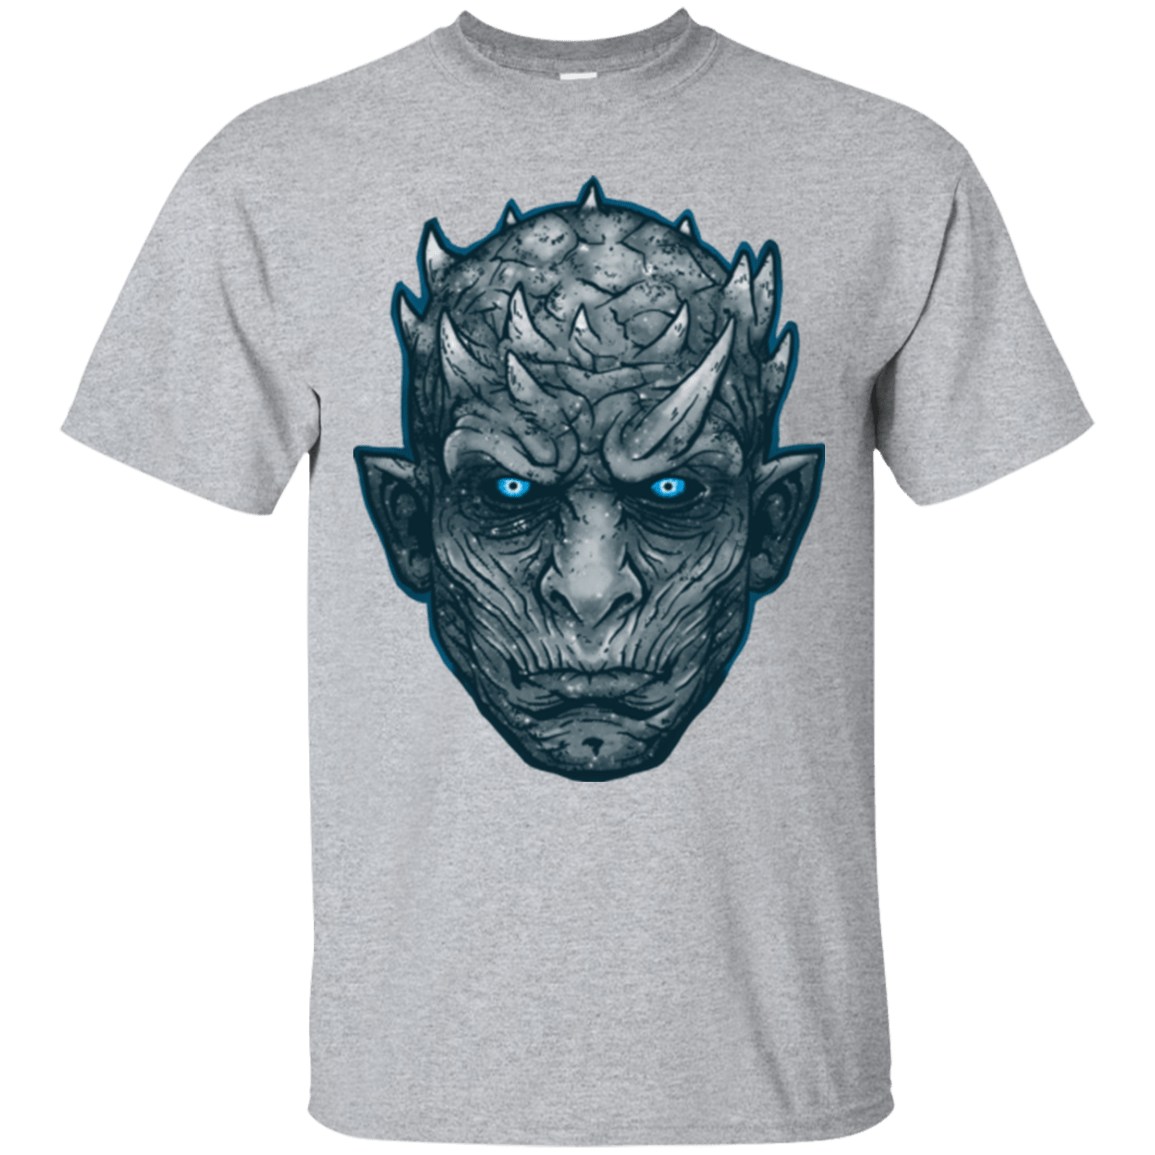 T-Shirts Sport Grey / Small The Other King2 T-Shirt